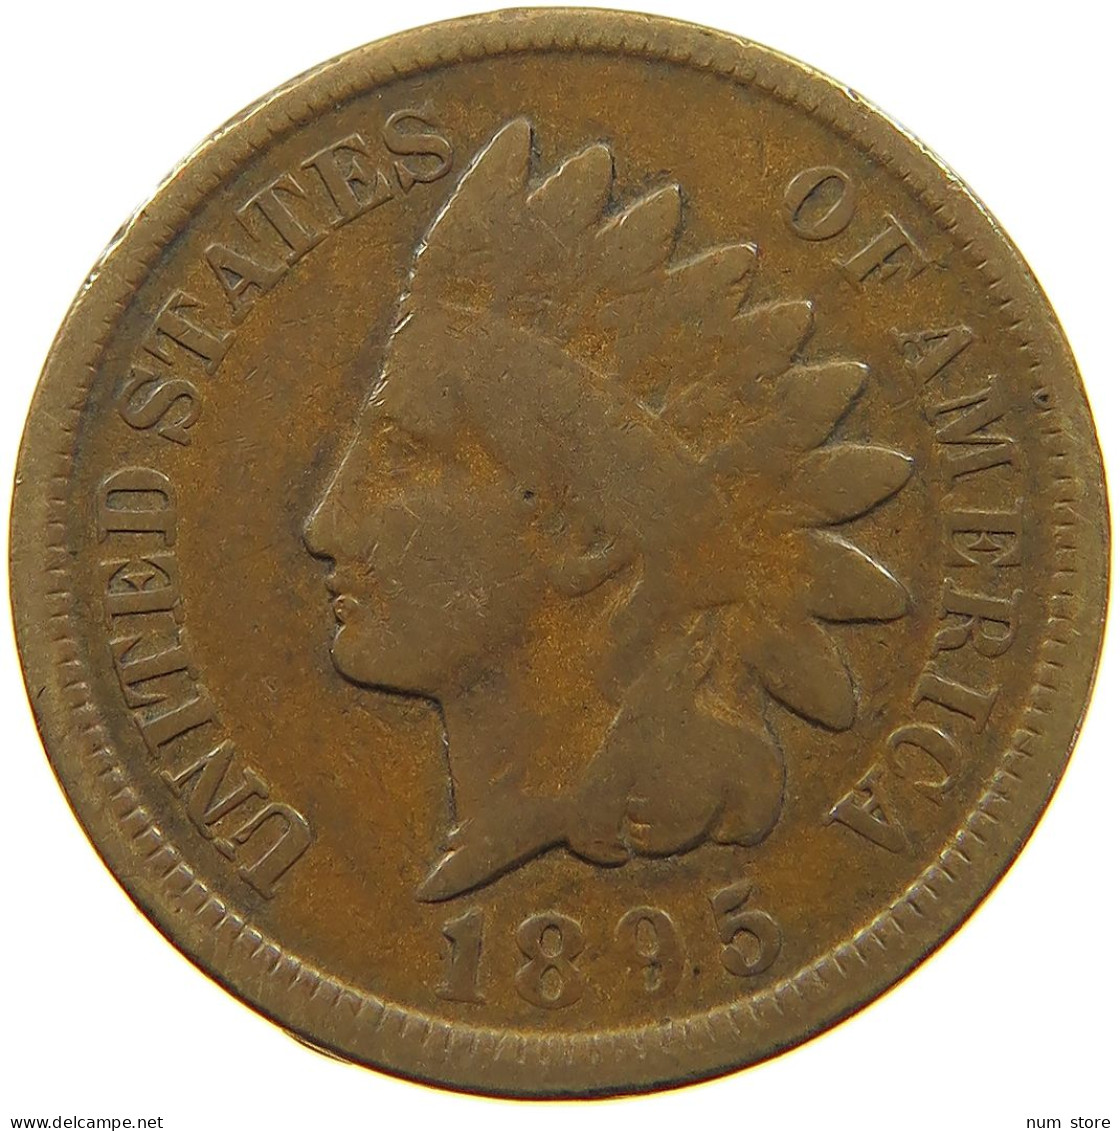 UNITED STATES OF AMERICA CENT 1895 INDIAN HEAD #a036 0677 - 1859-1909: Indian Head